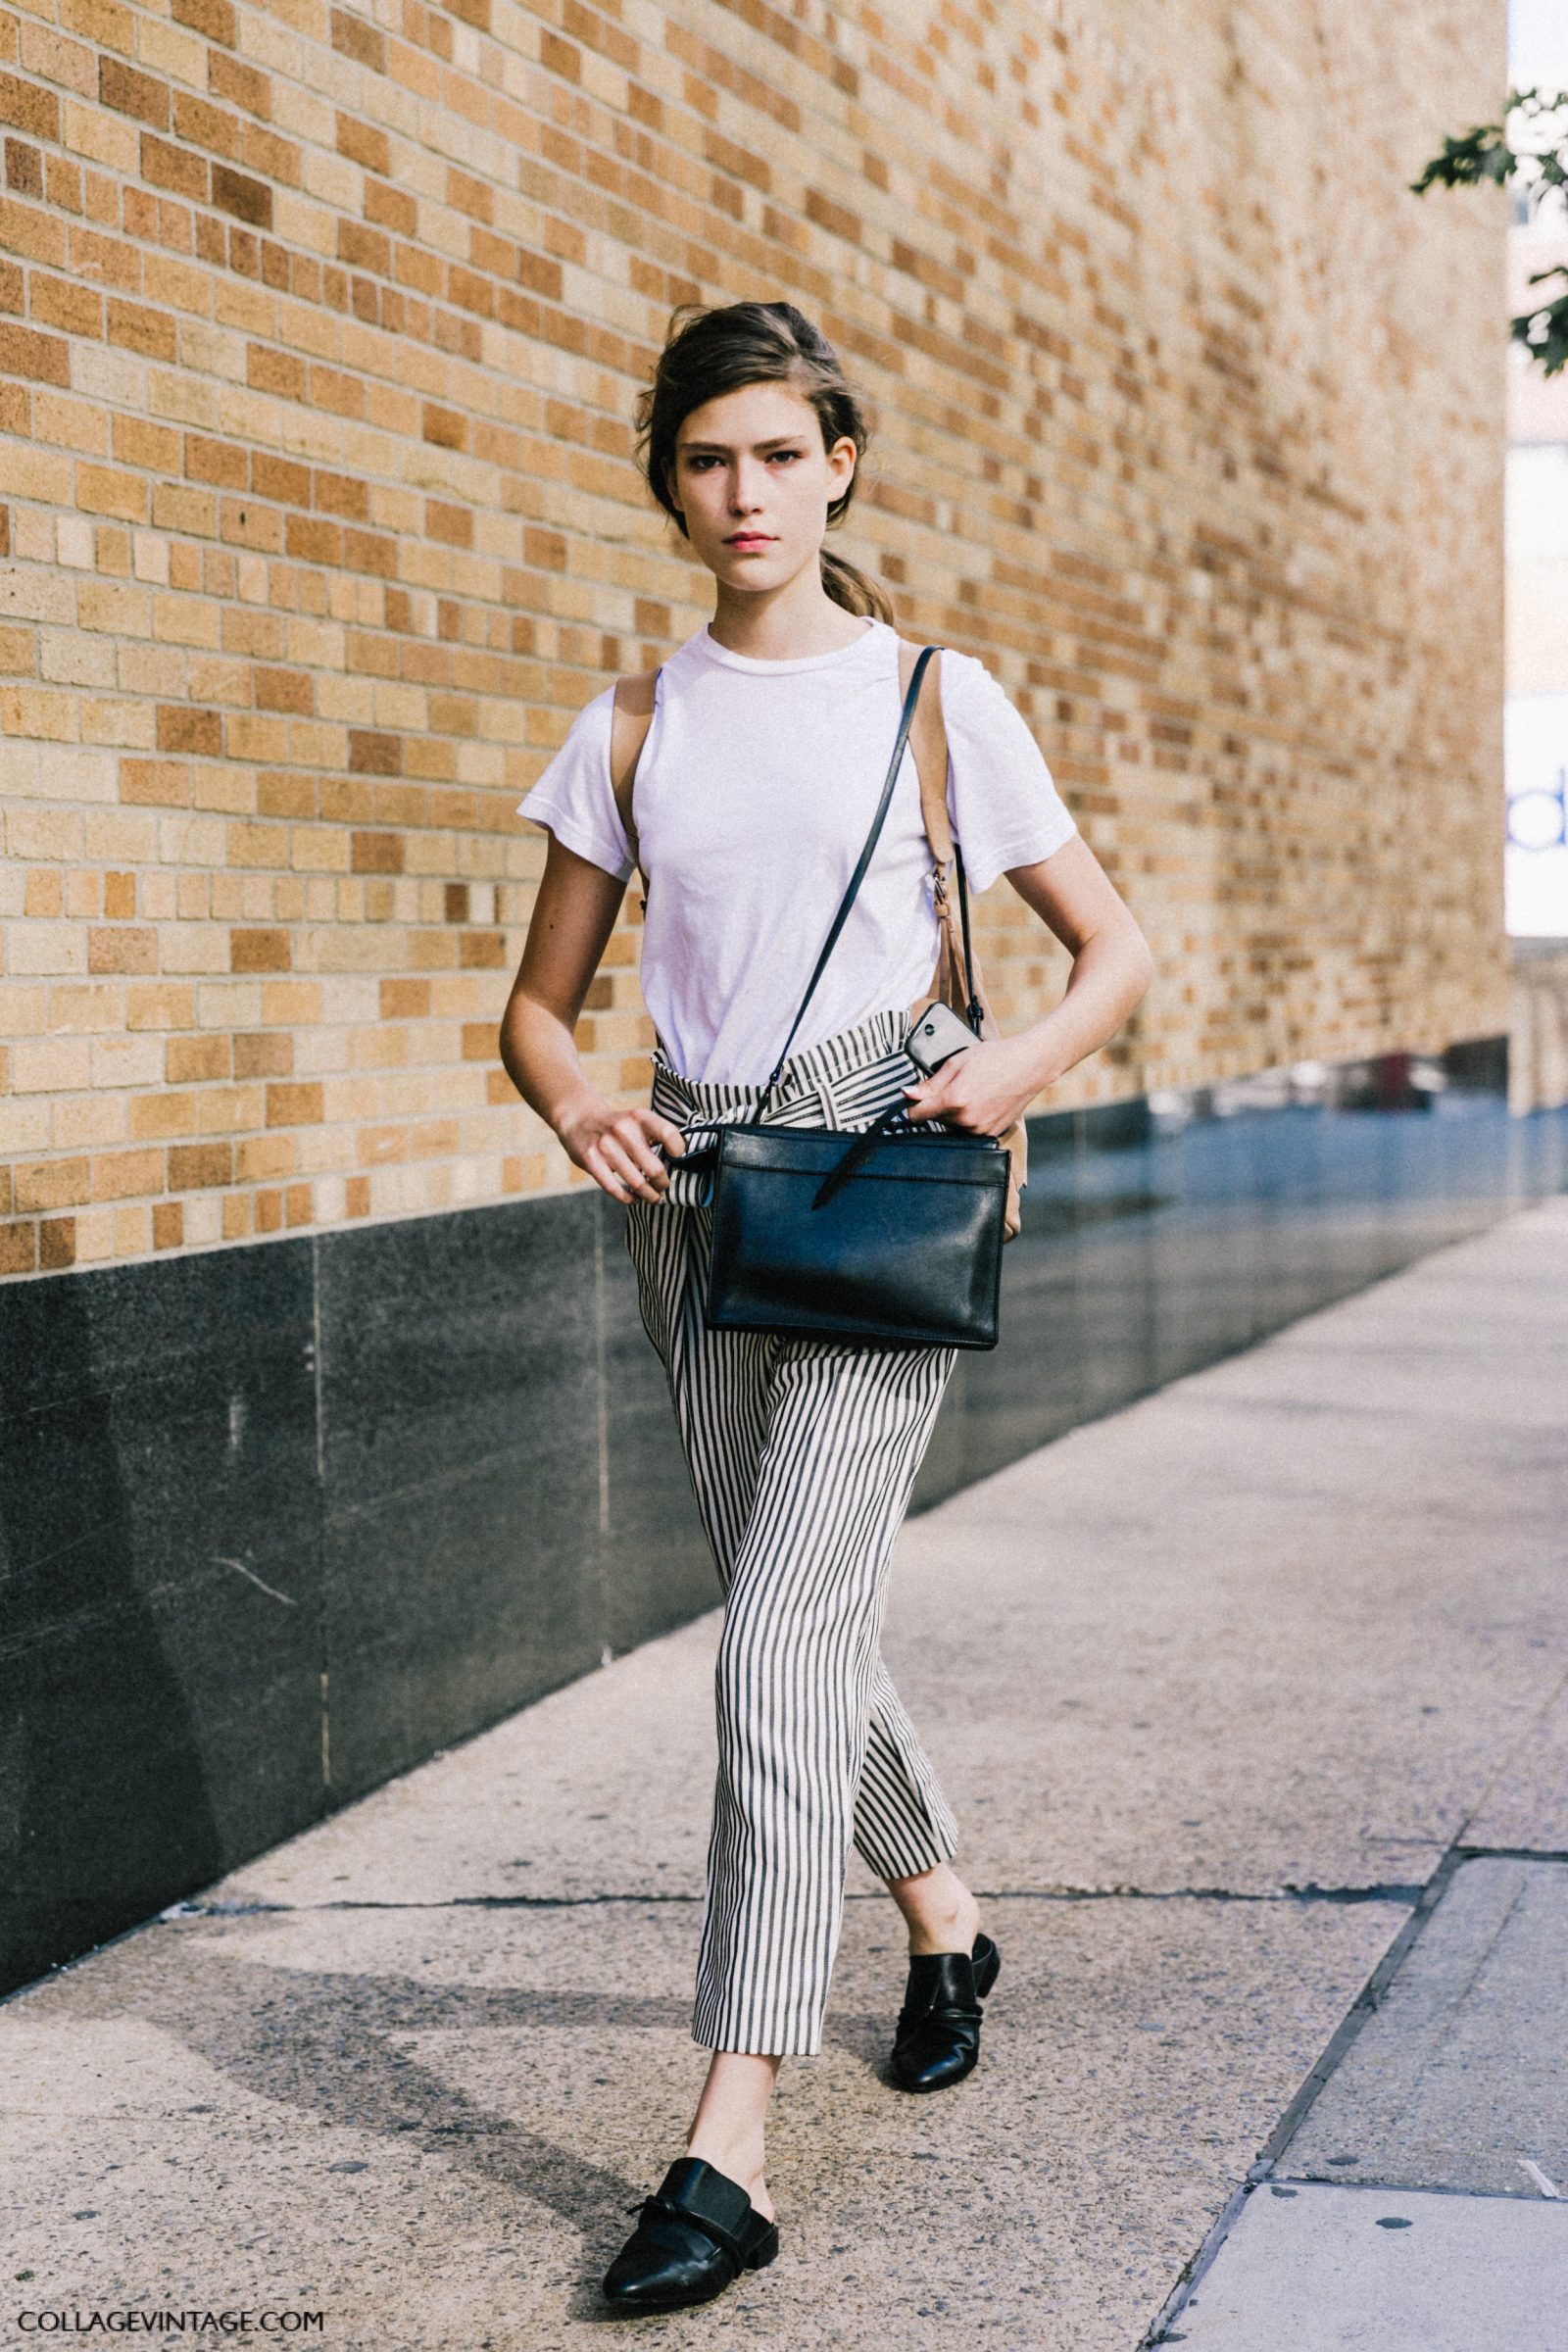 nyfw-new_york_fashion_week_ss17-street_style-outfits-collage_vintage-vintage-phillip_lim-the-row-proenza_schouler-rossie_aussolin-401